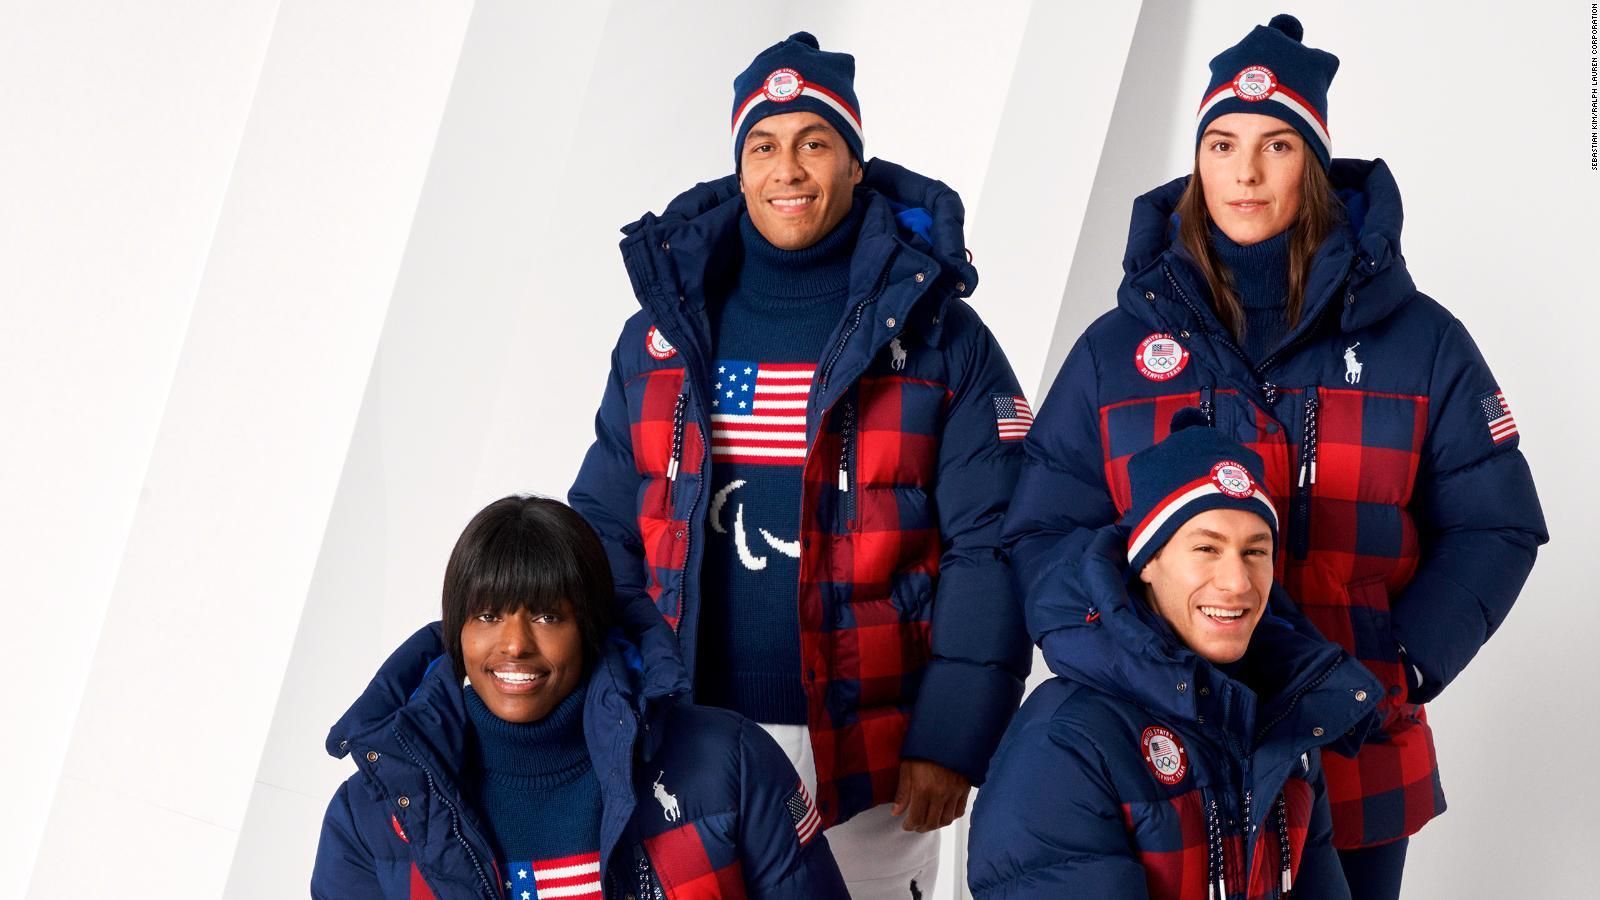 Winter Olympics 2022: Team outfits and brands behind them